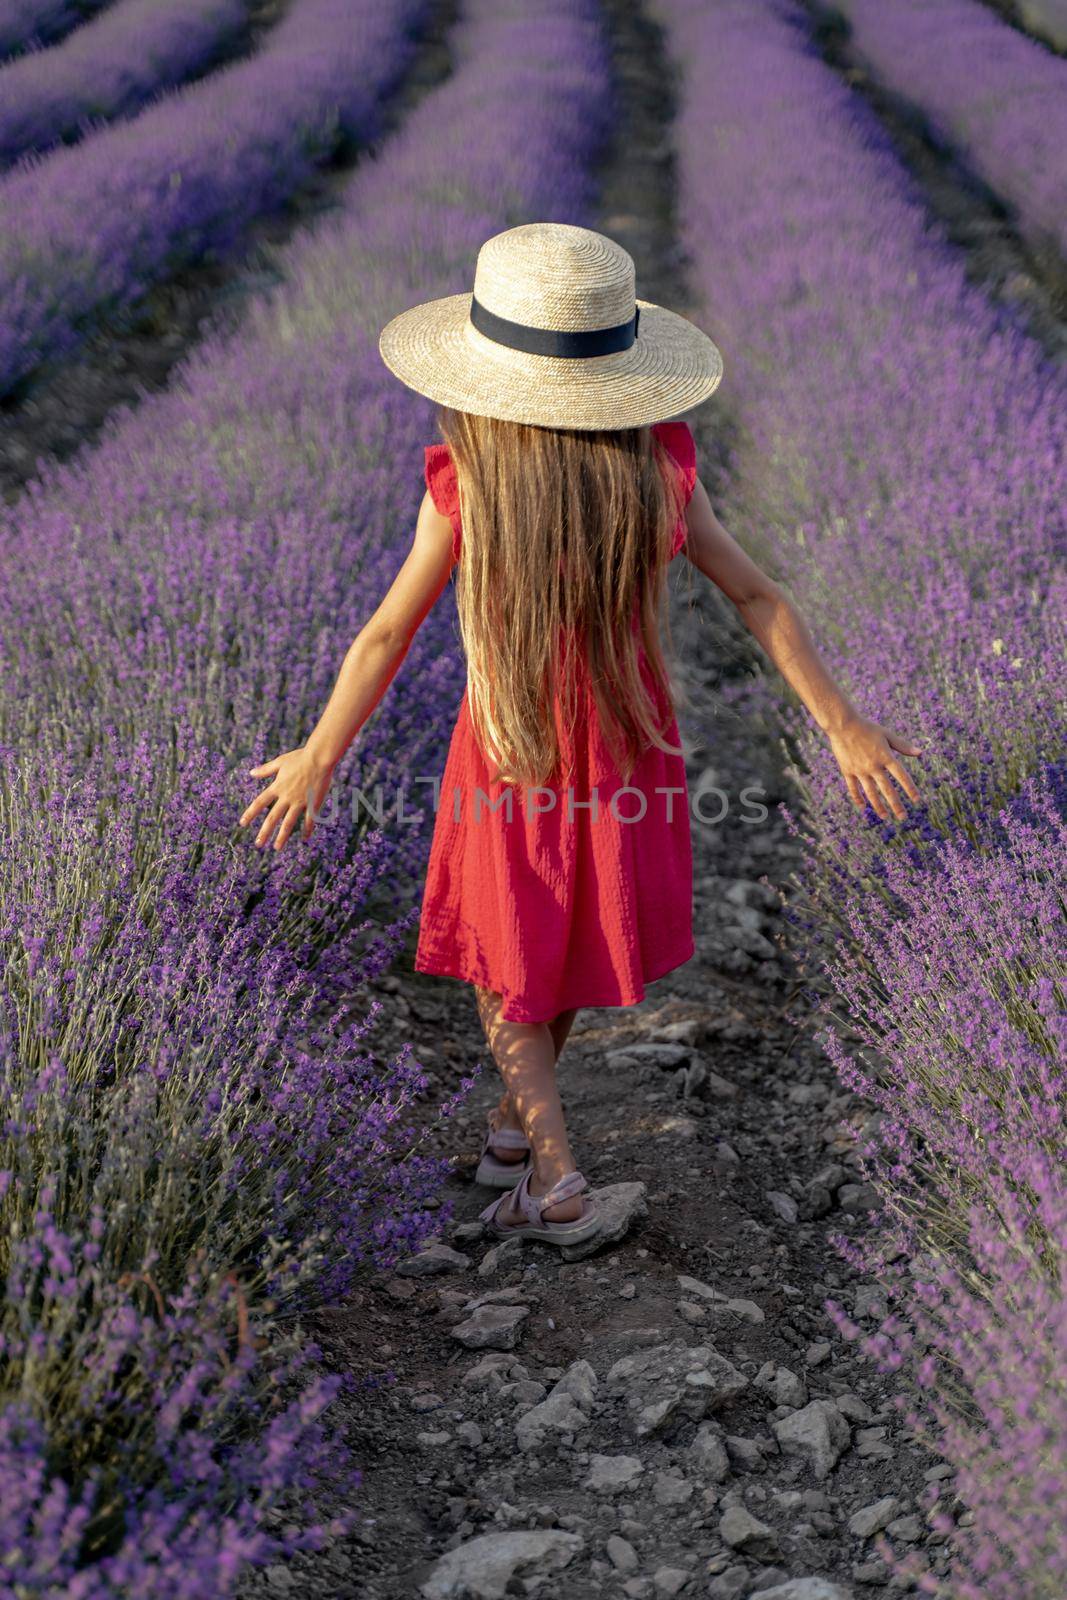 A girl with long brown loose hair 7 years old in a red dress and a hat walks alone in a lavender field during the day spreading her arms in both directions. by Matiunina